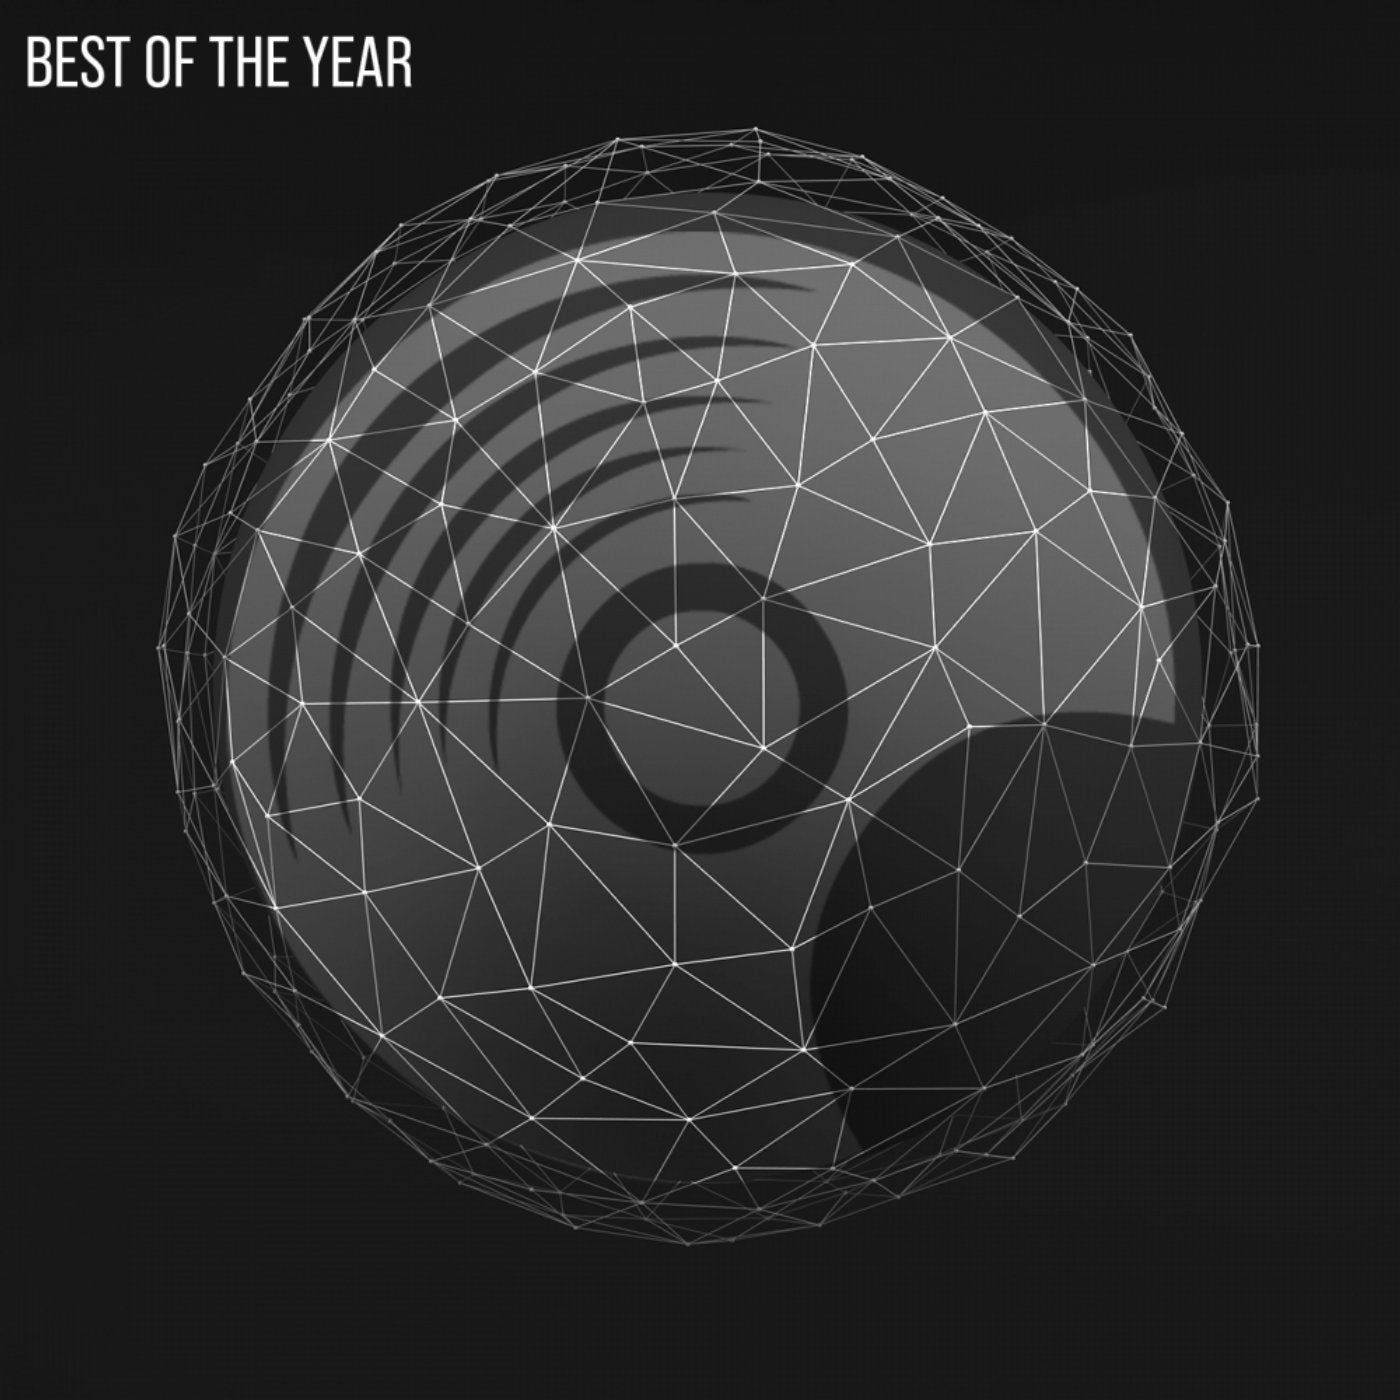 Oxidia Music - Best of the year